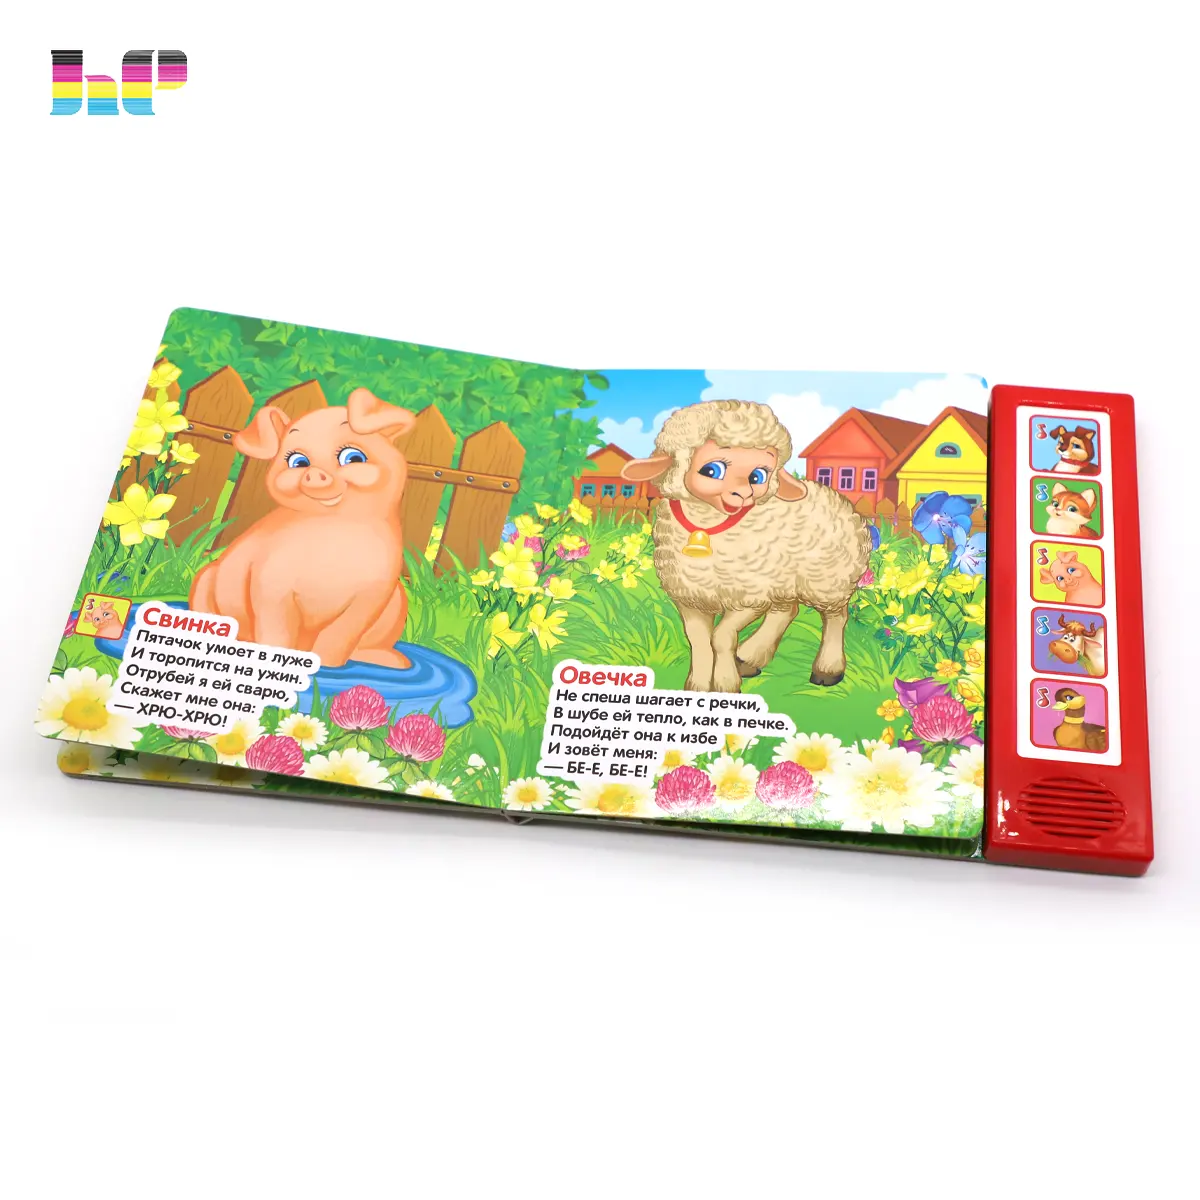 Oem kids preschool learning english musical sound board books for toddlers